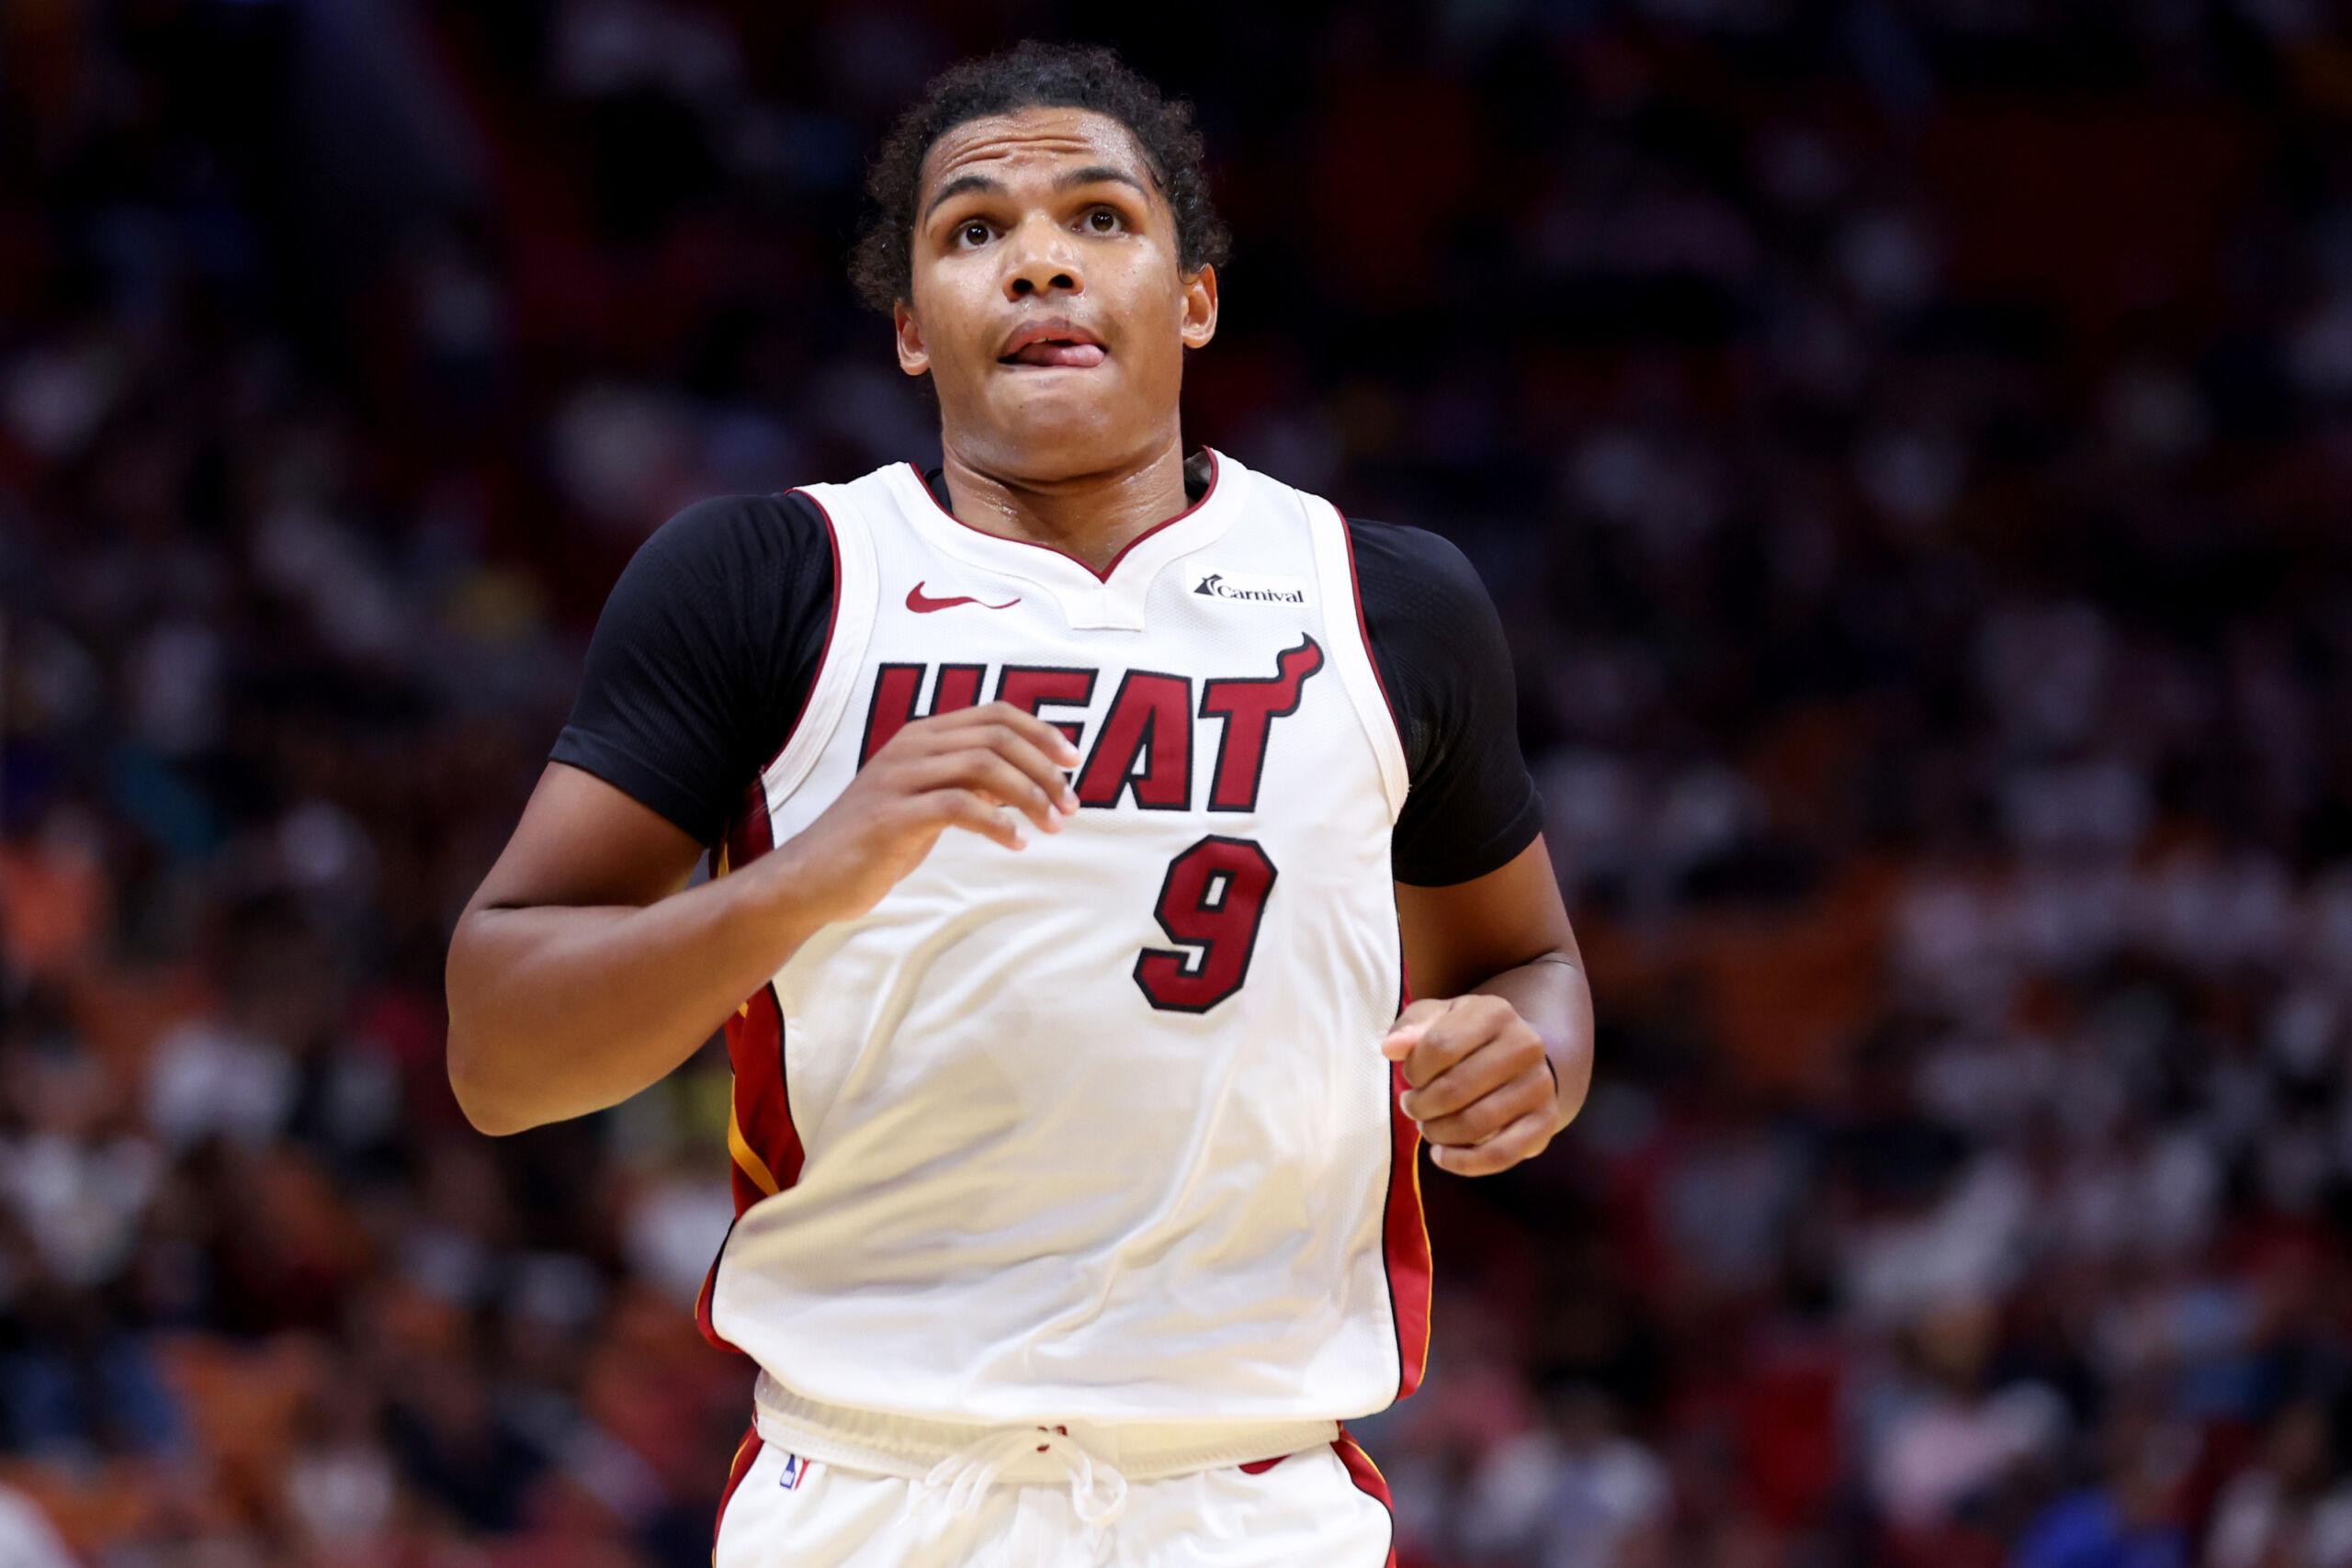 Miami Heat: An early look at the Heat depth chart going into next